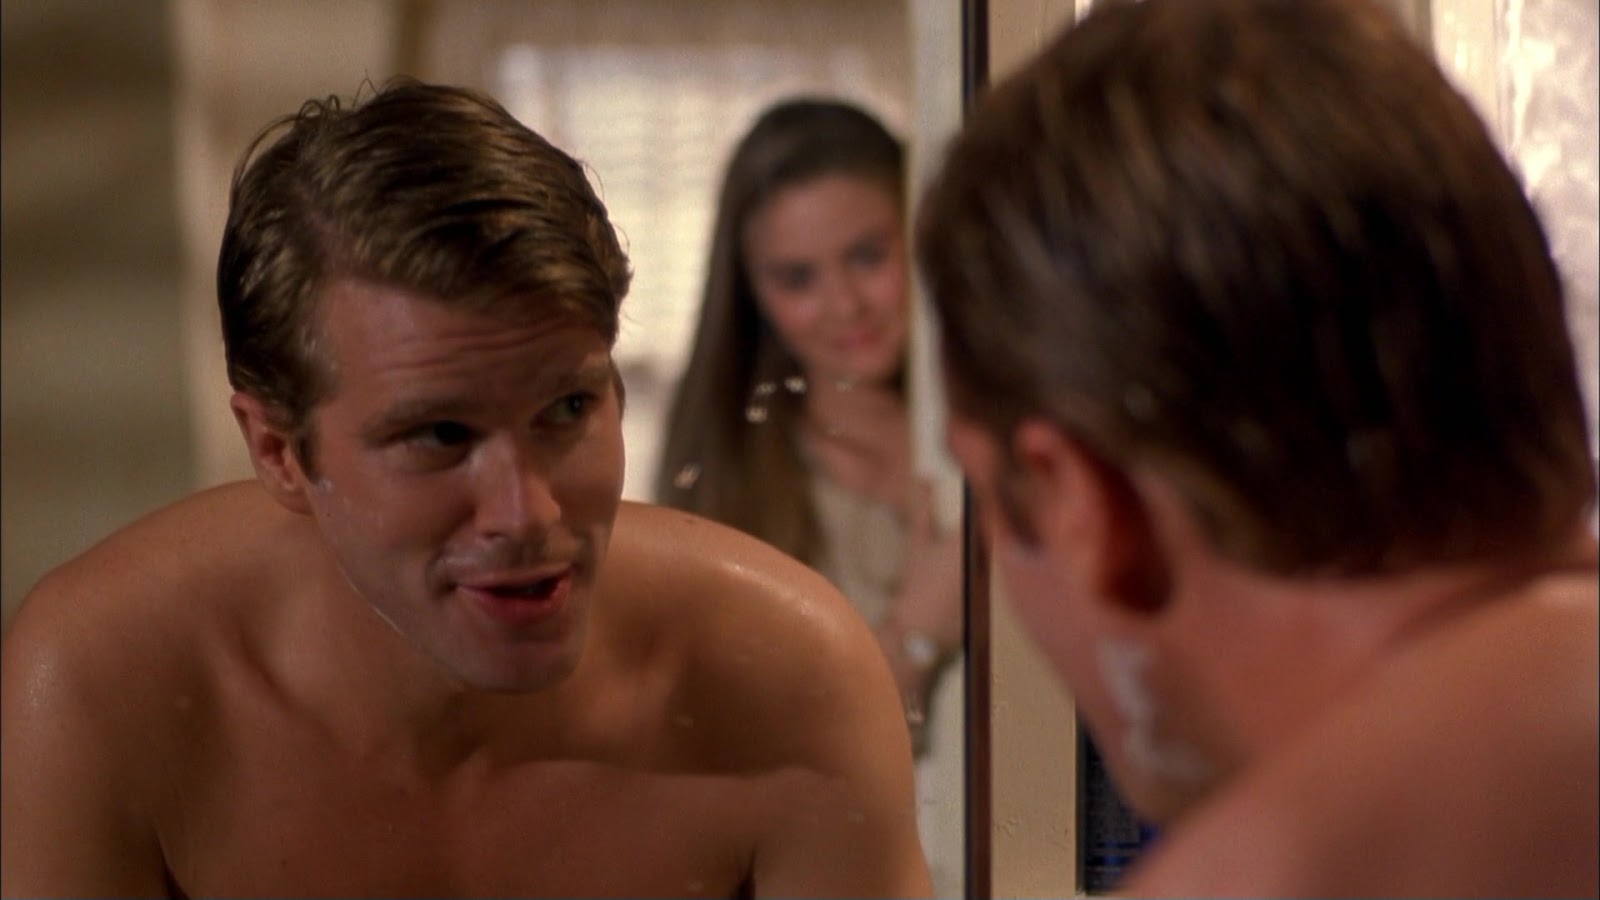 Cary Elwes nude in The Crush.